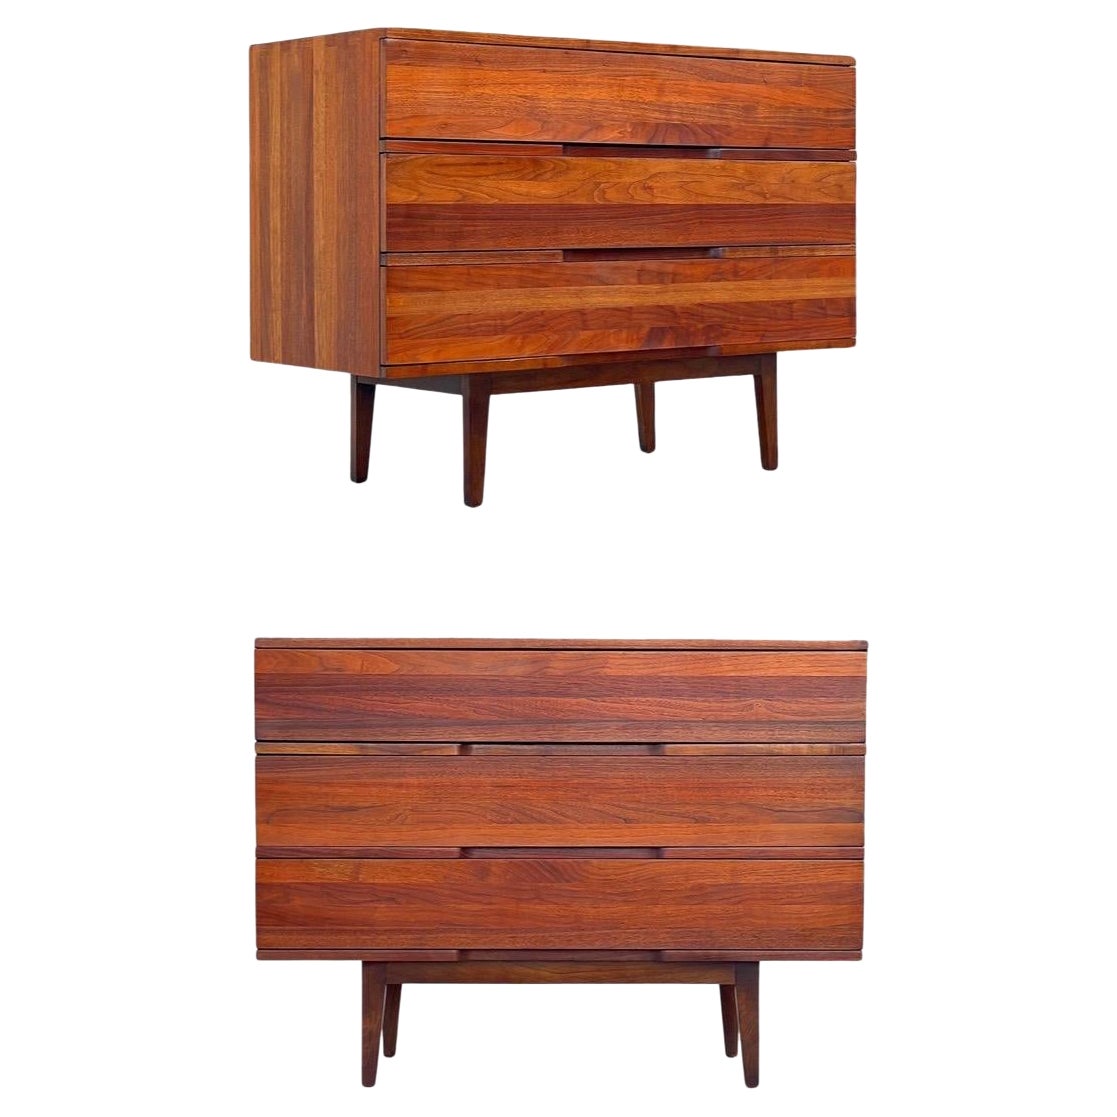 Pair of Mel Smilow for Smilow-Thielle Midcentury Bachelors Chests in Walnut